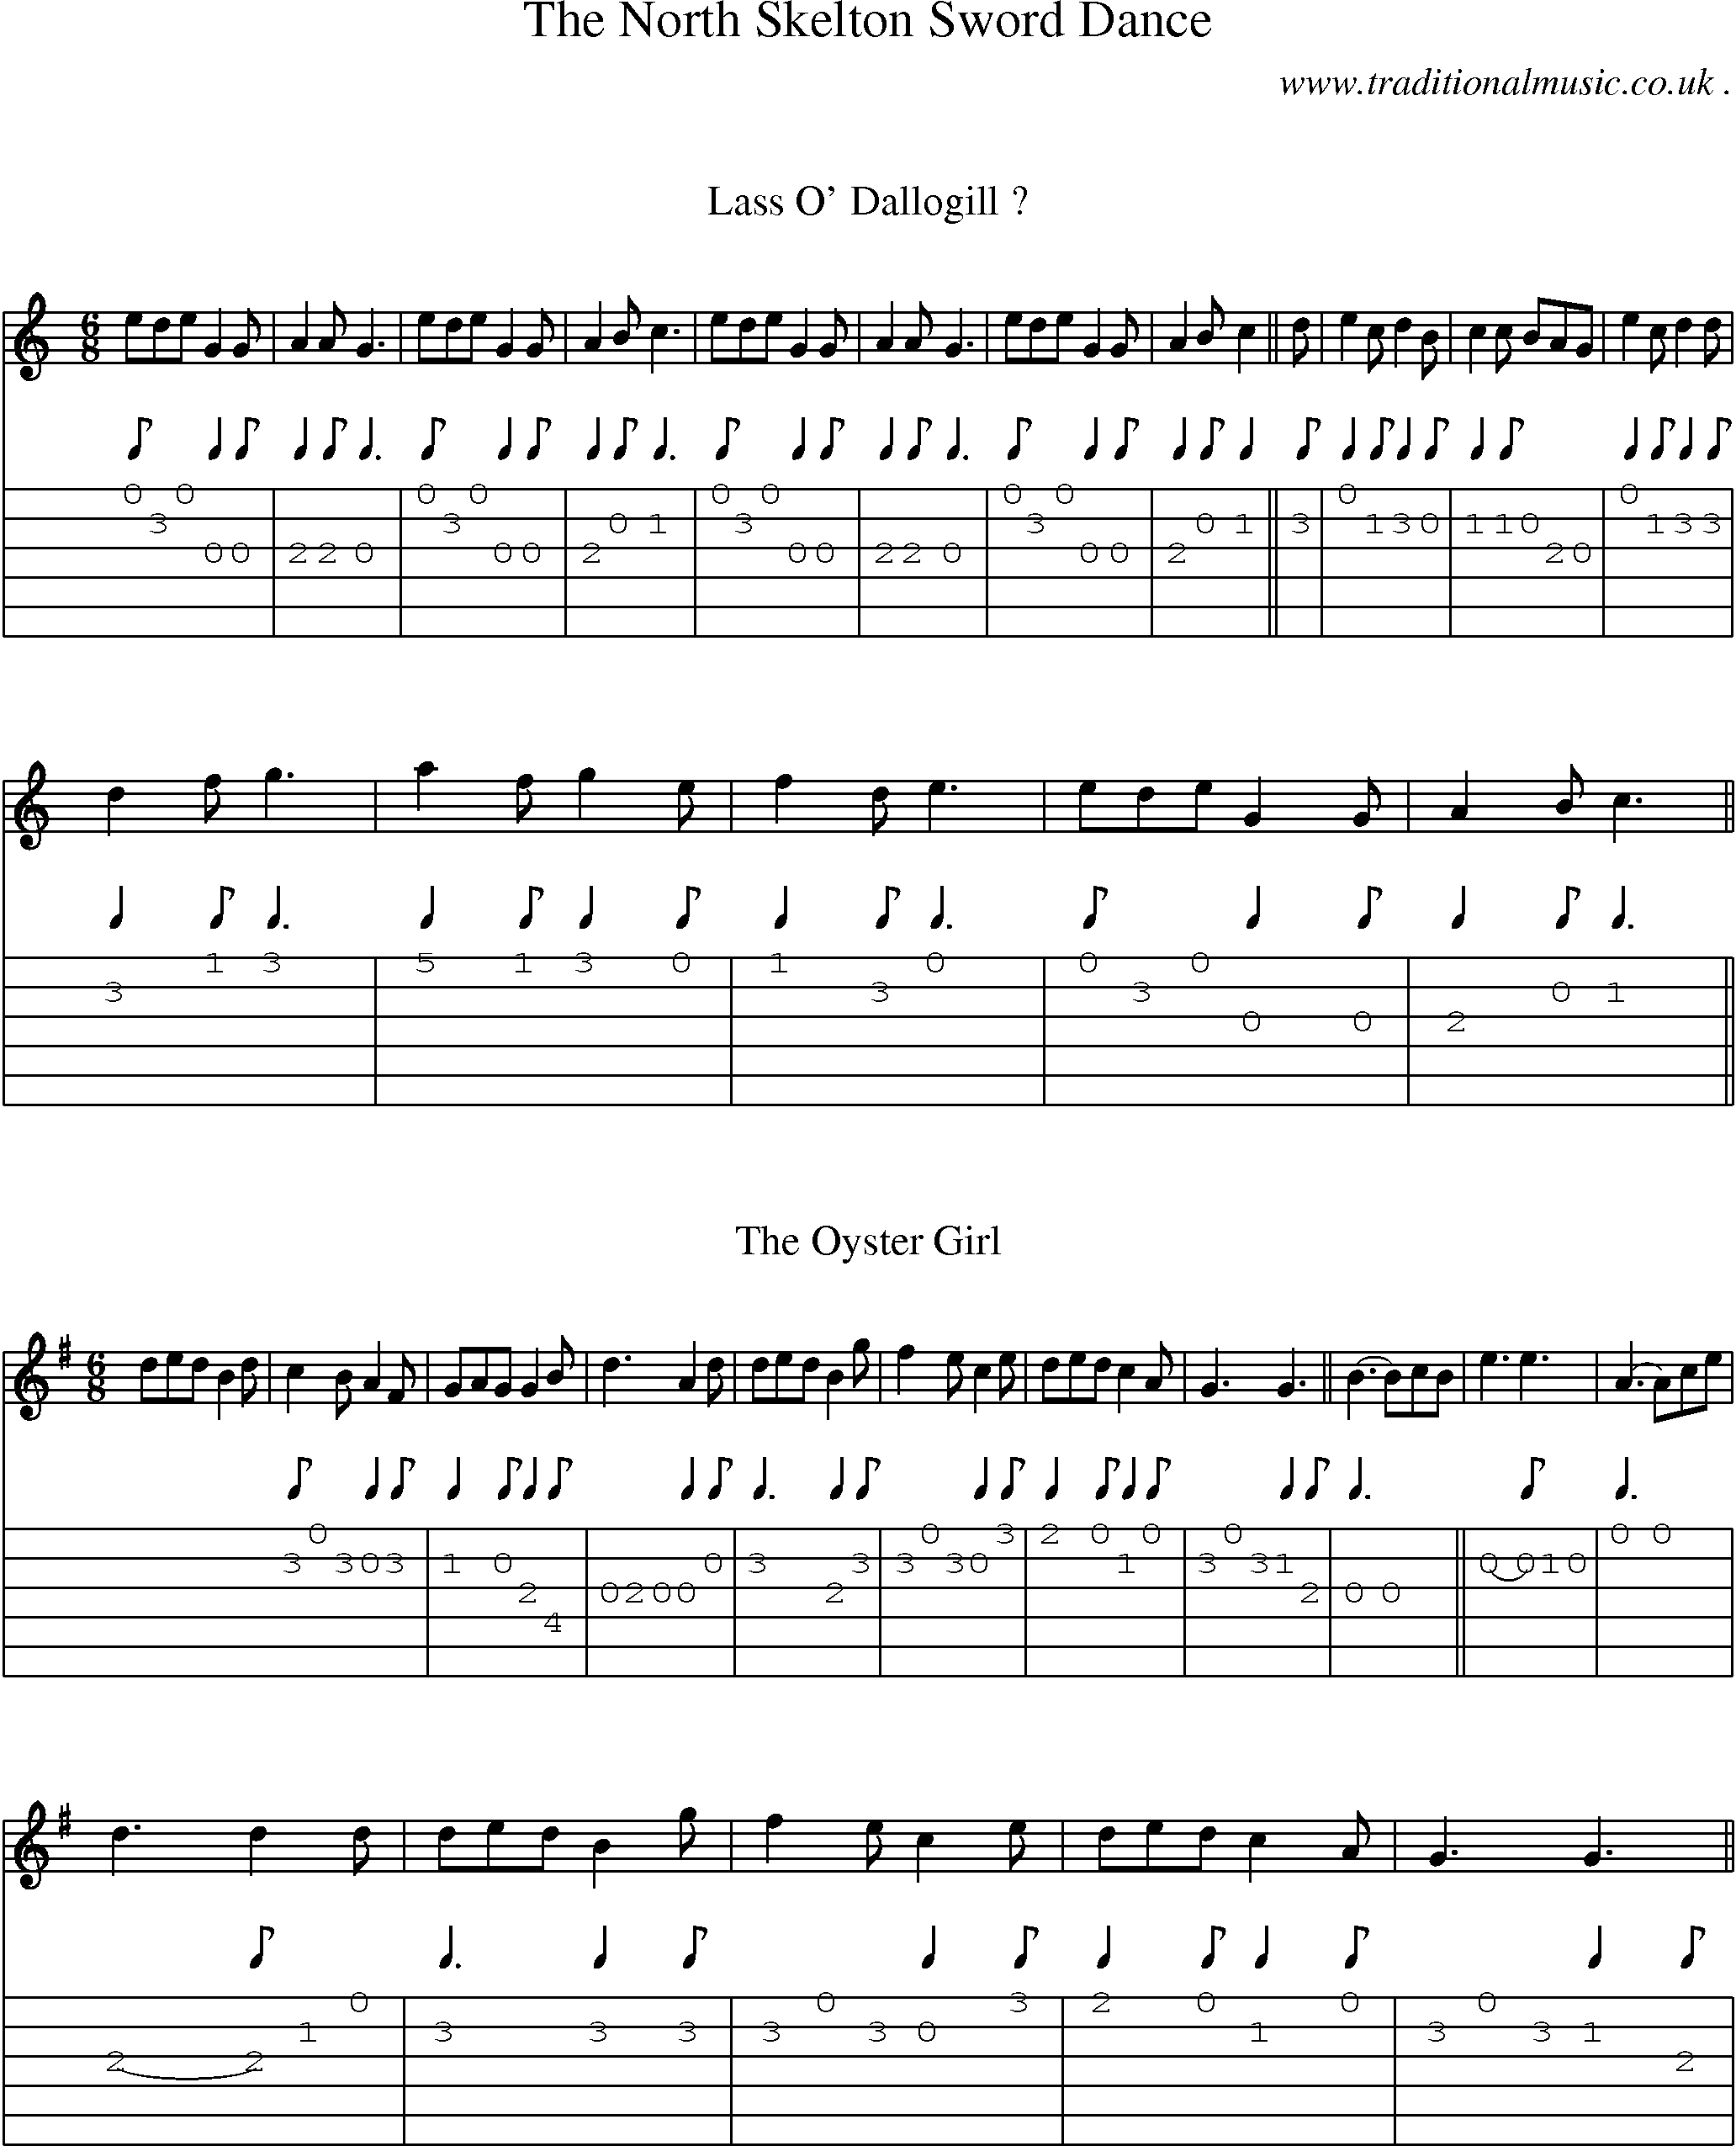 Sheet-Music and Guitar Tabs for The North Skelton Sword Dance